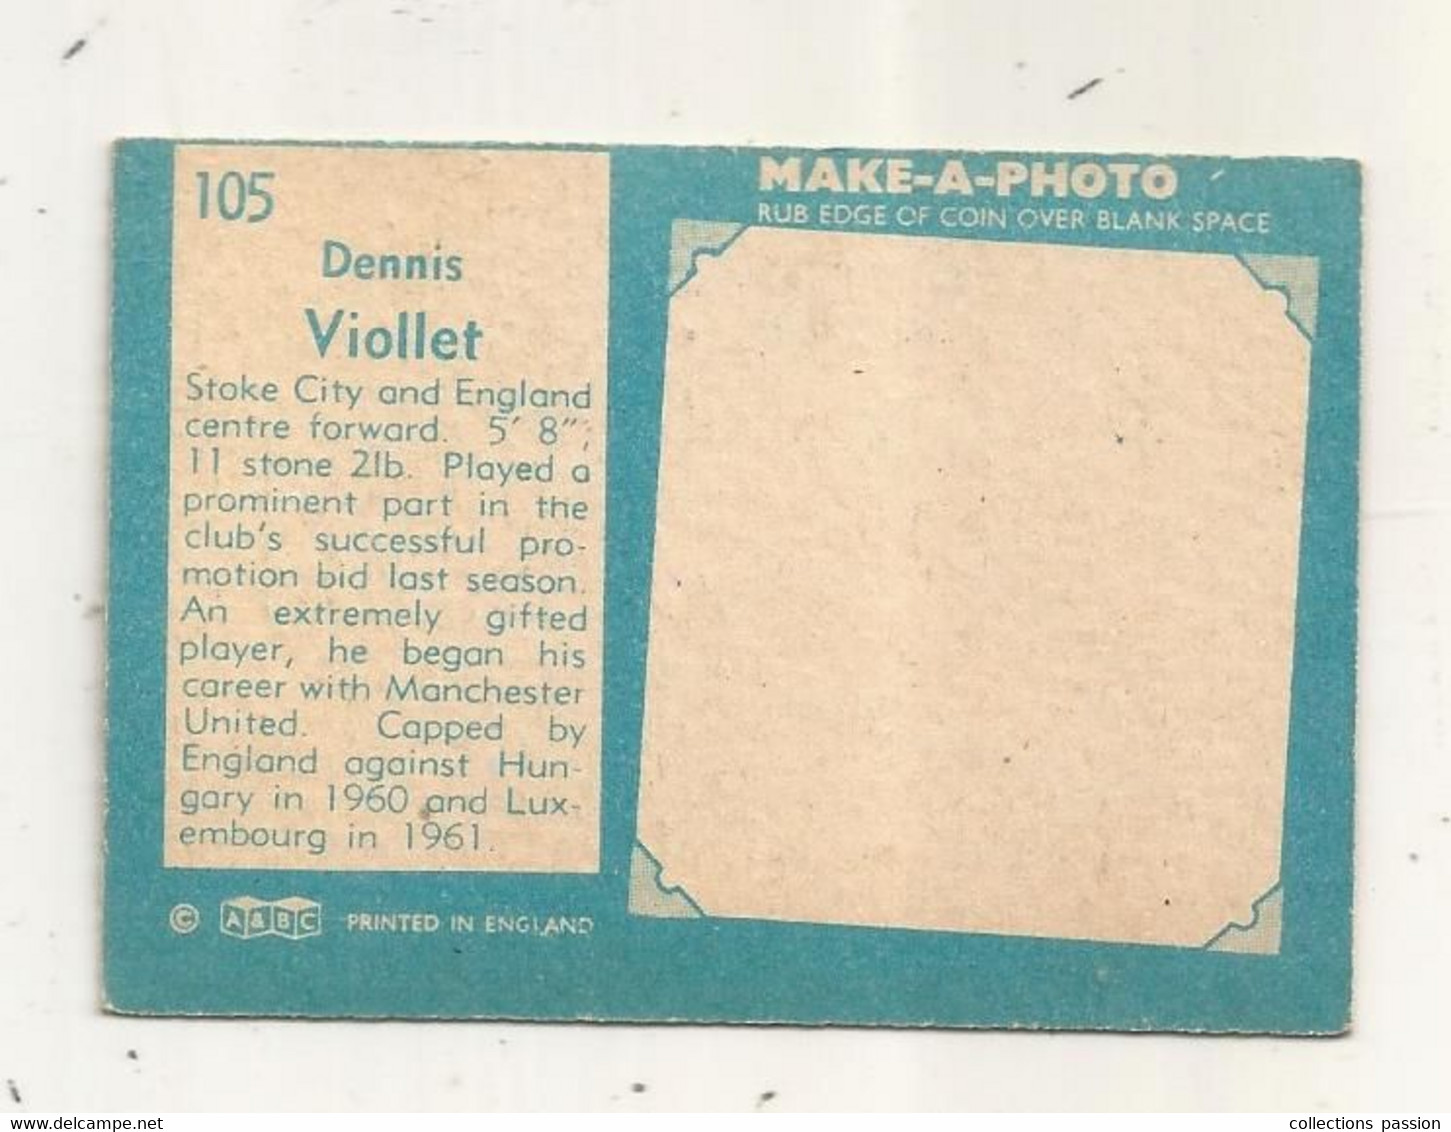 Trading Card , A&BC , England, Chewing Gum, Serie: Make A Photo , Année 60 , N° 105, DENNIS VIOLLET, Stoke City - Tarjetas